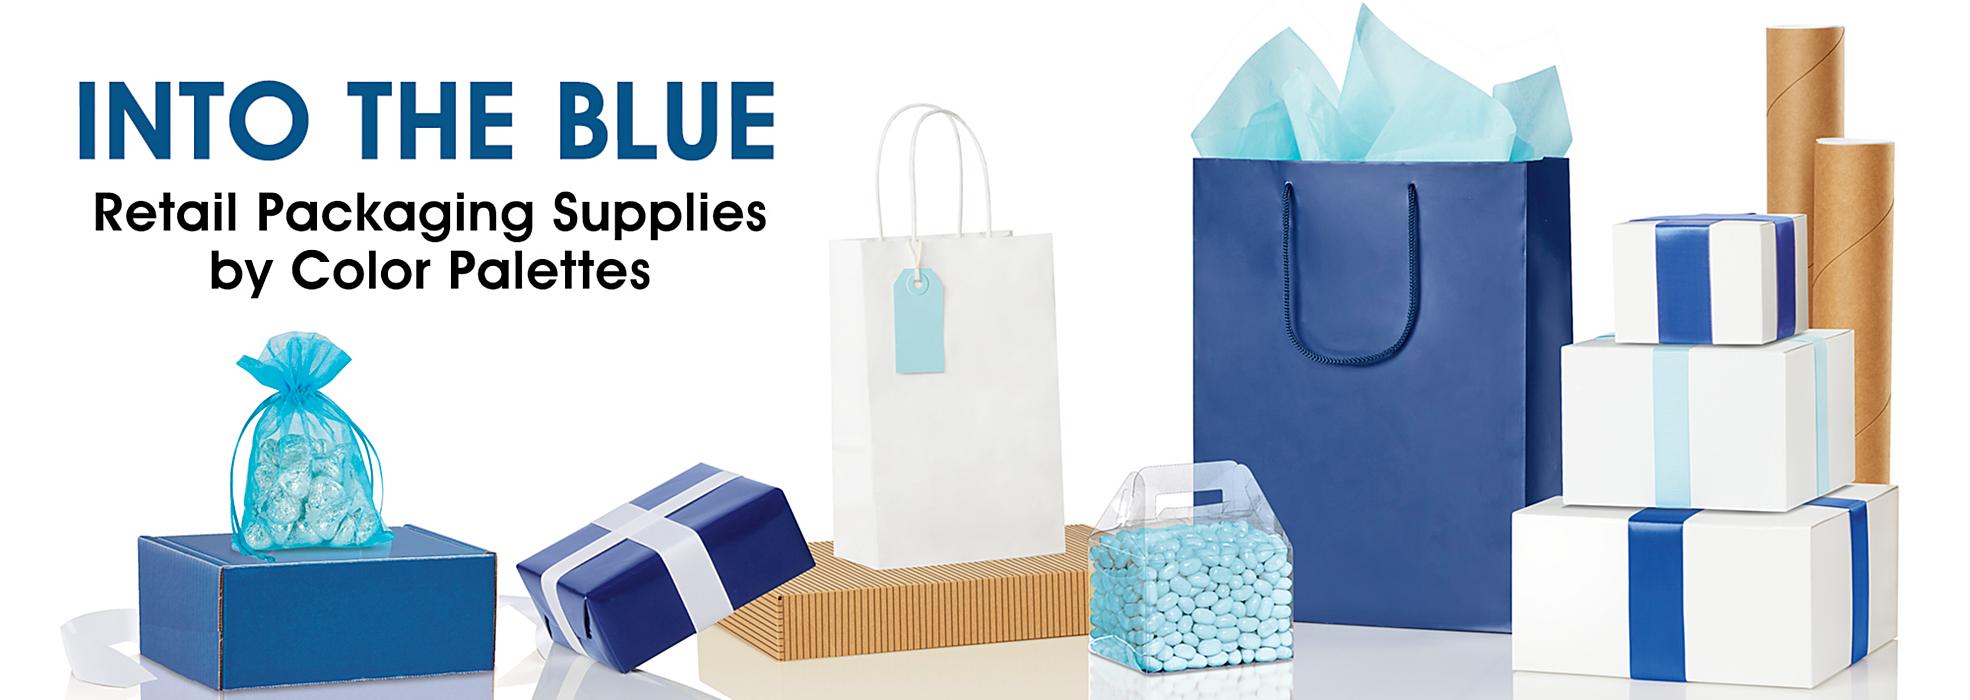 Into The Blue - Retail Packaging Supplies by Color Palettes